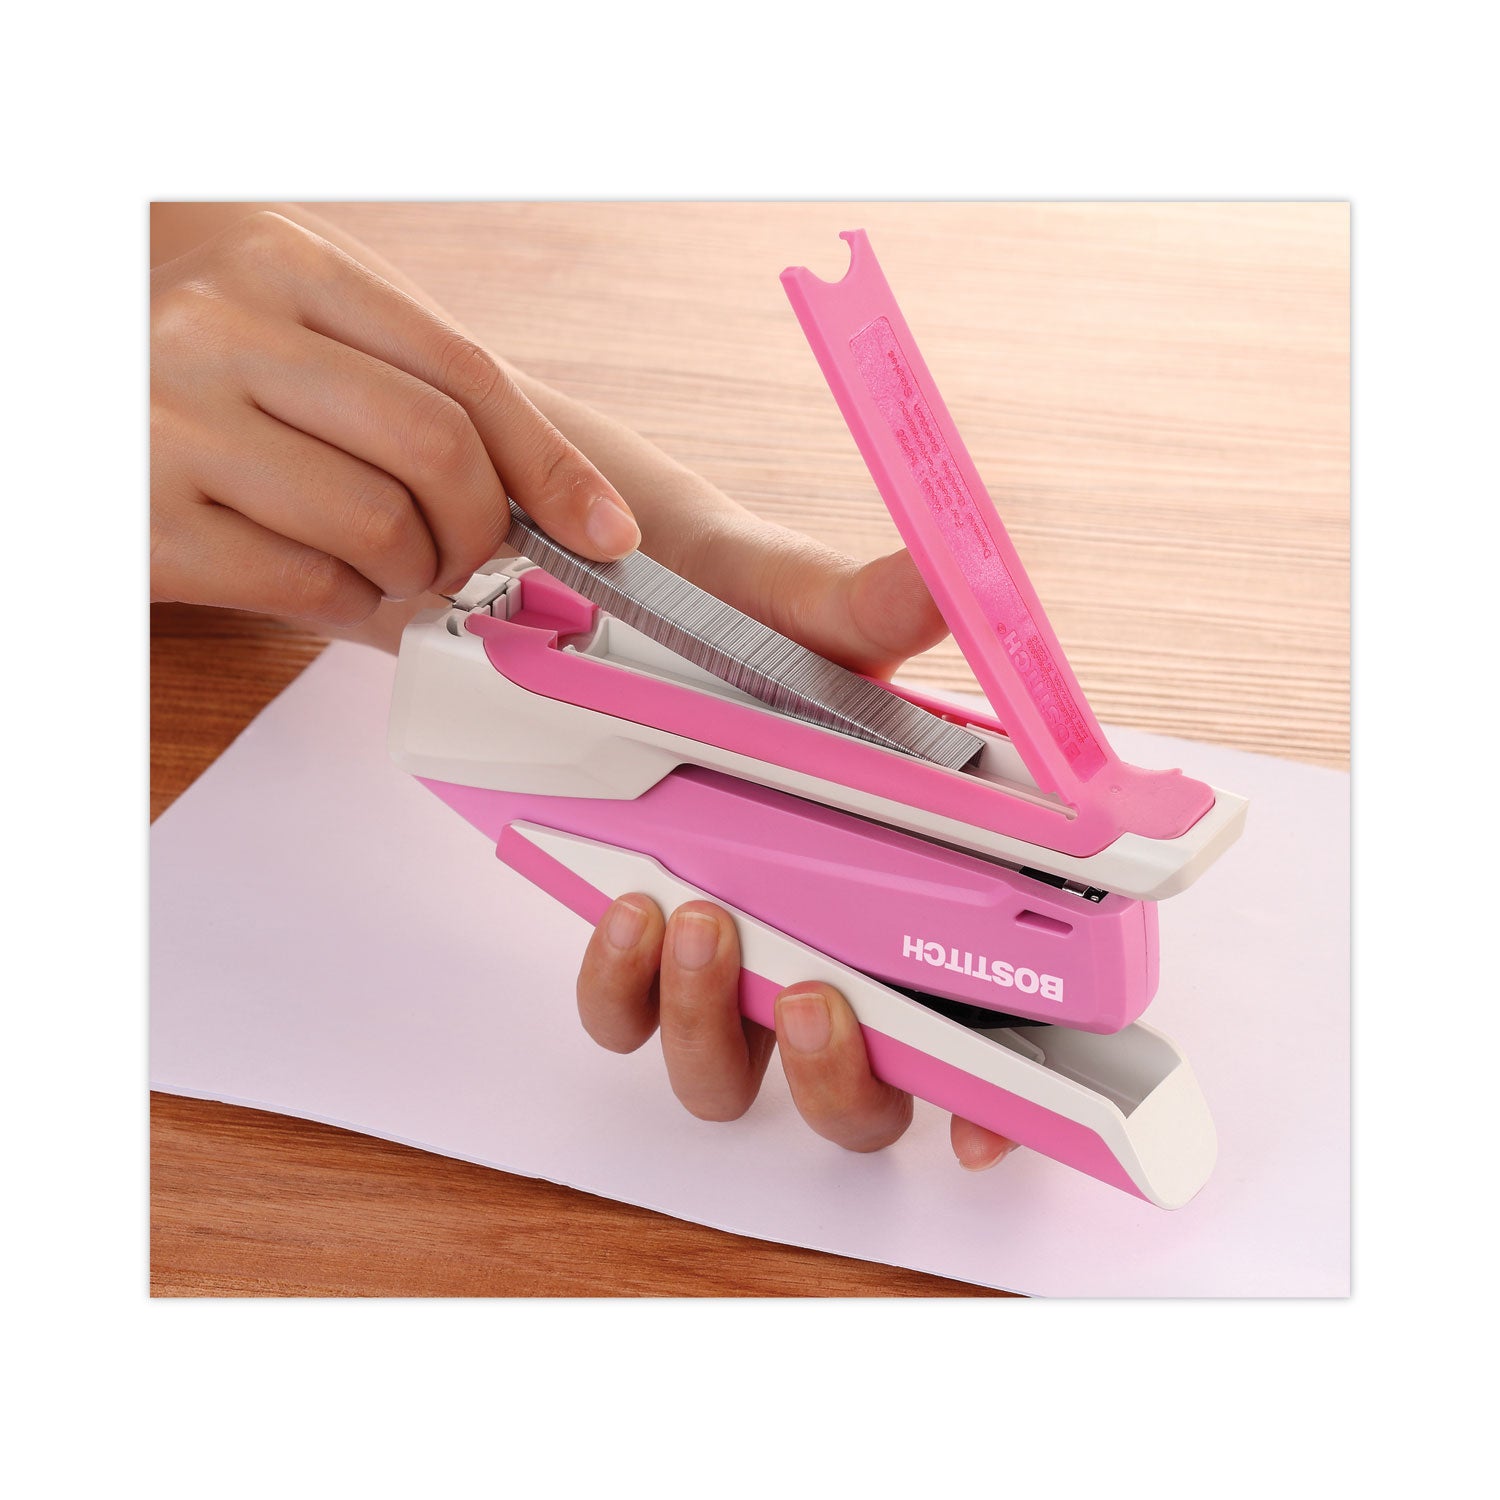 InCourage Spring-Powered Desktop Stapler with Antimicrobial Protection, 20-Sheet Capacity, Pink/Gray - 